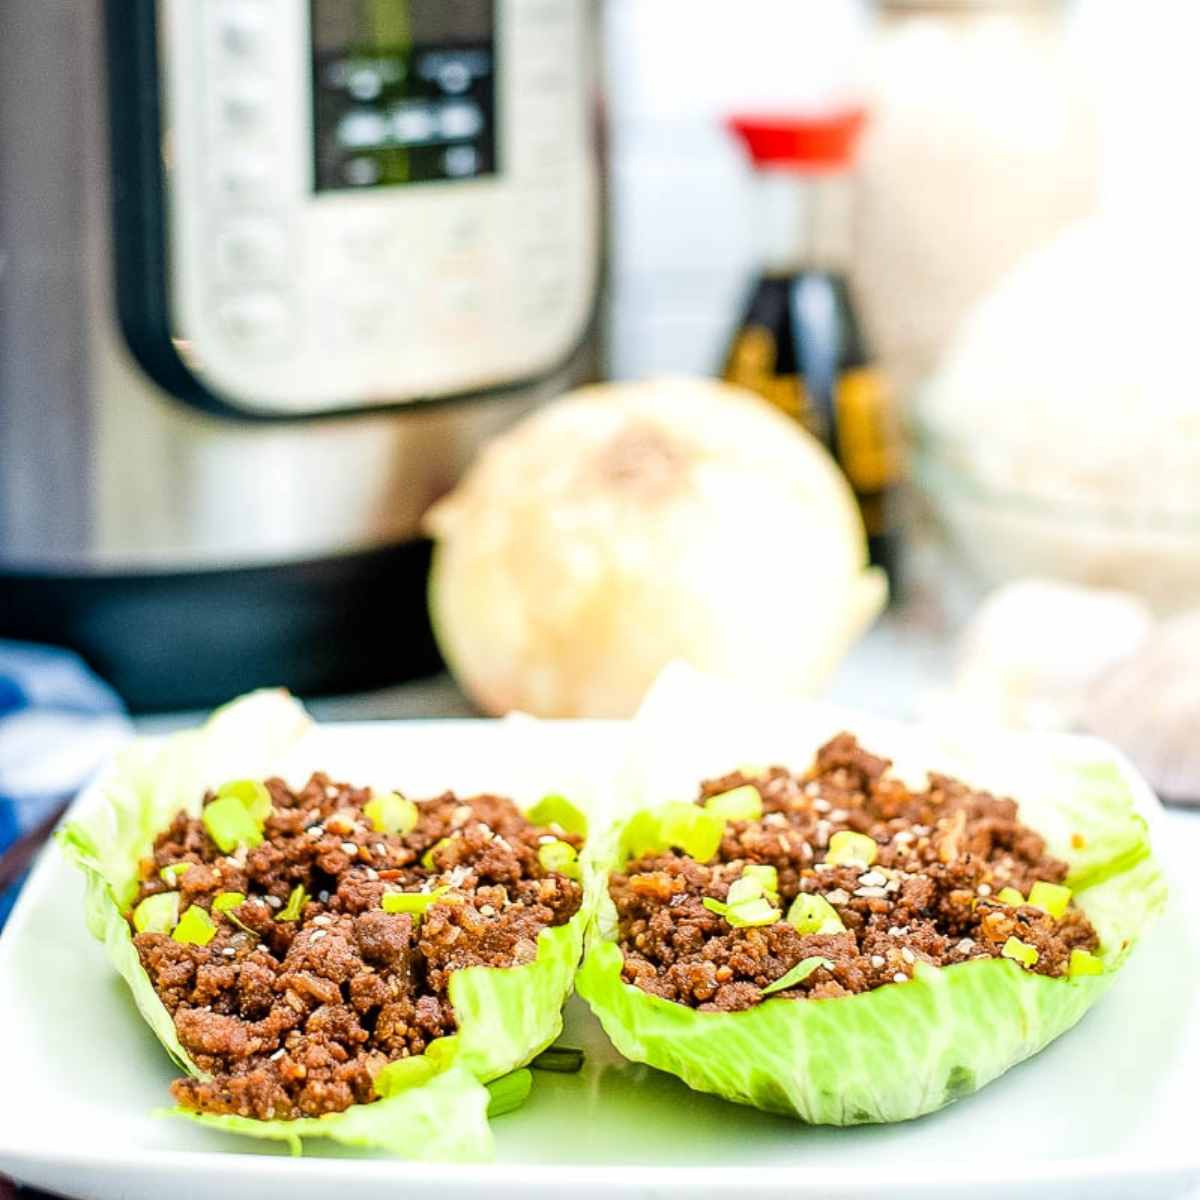 Korean ground beef in lettuce wraps next to an onion and Instant Pot.